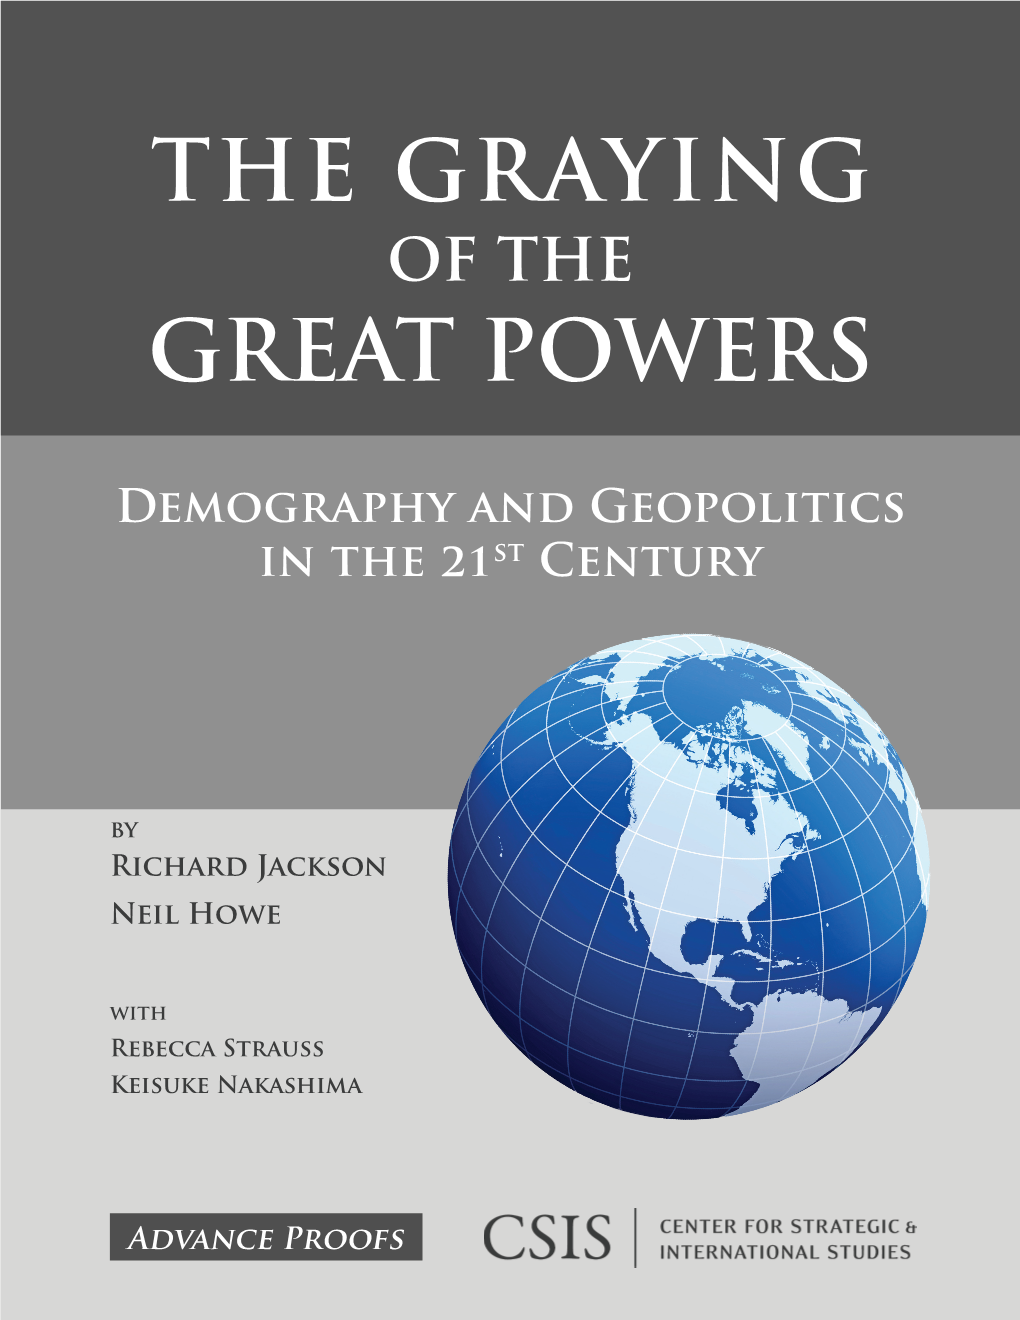 The Graying Great Powers